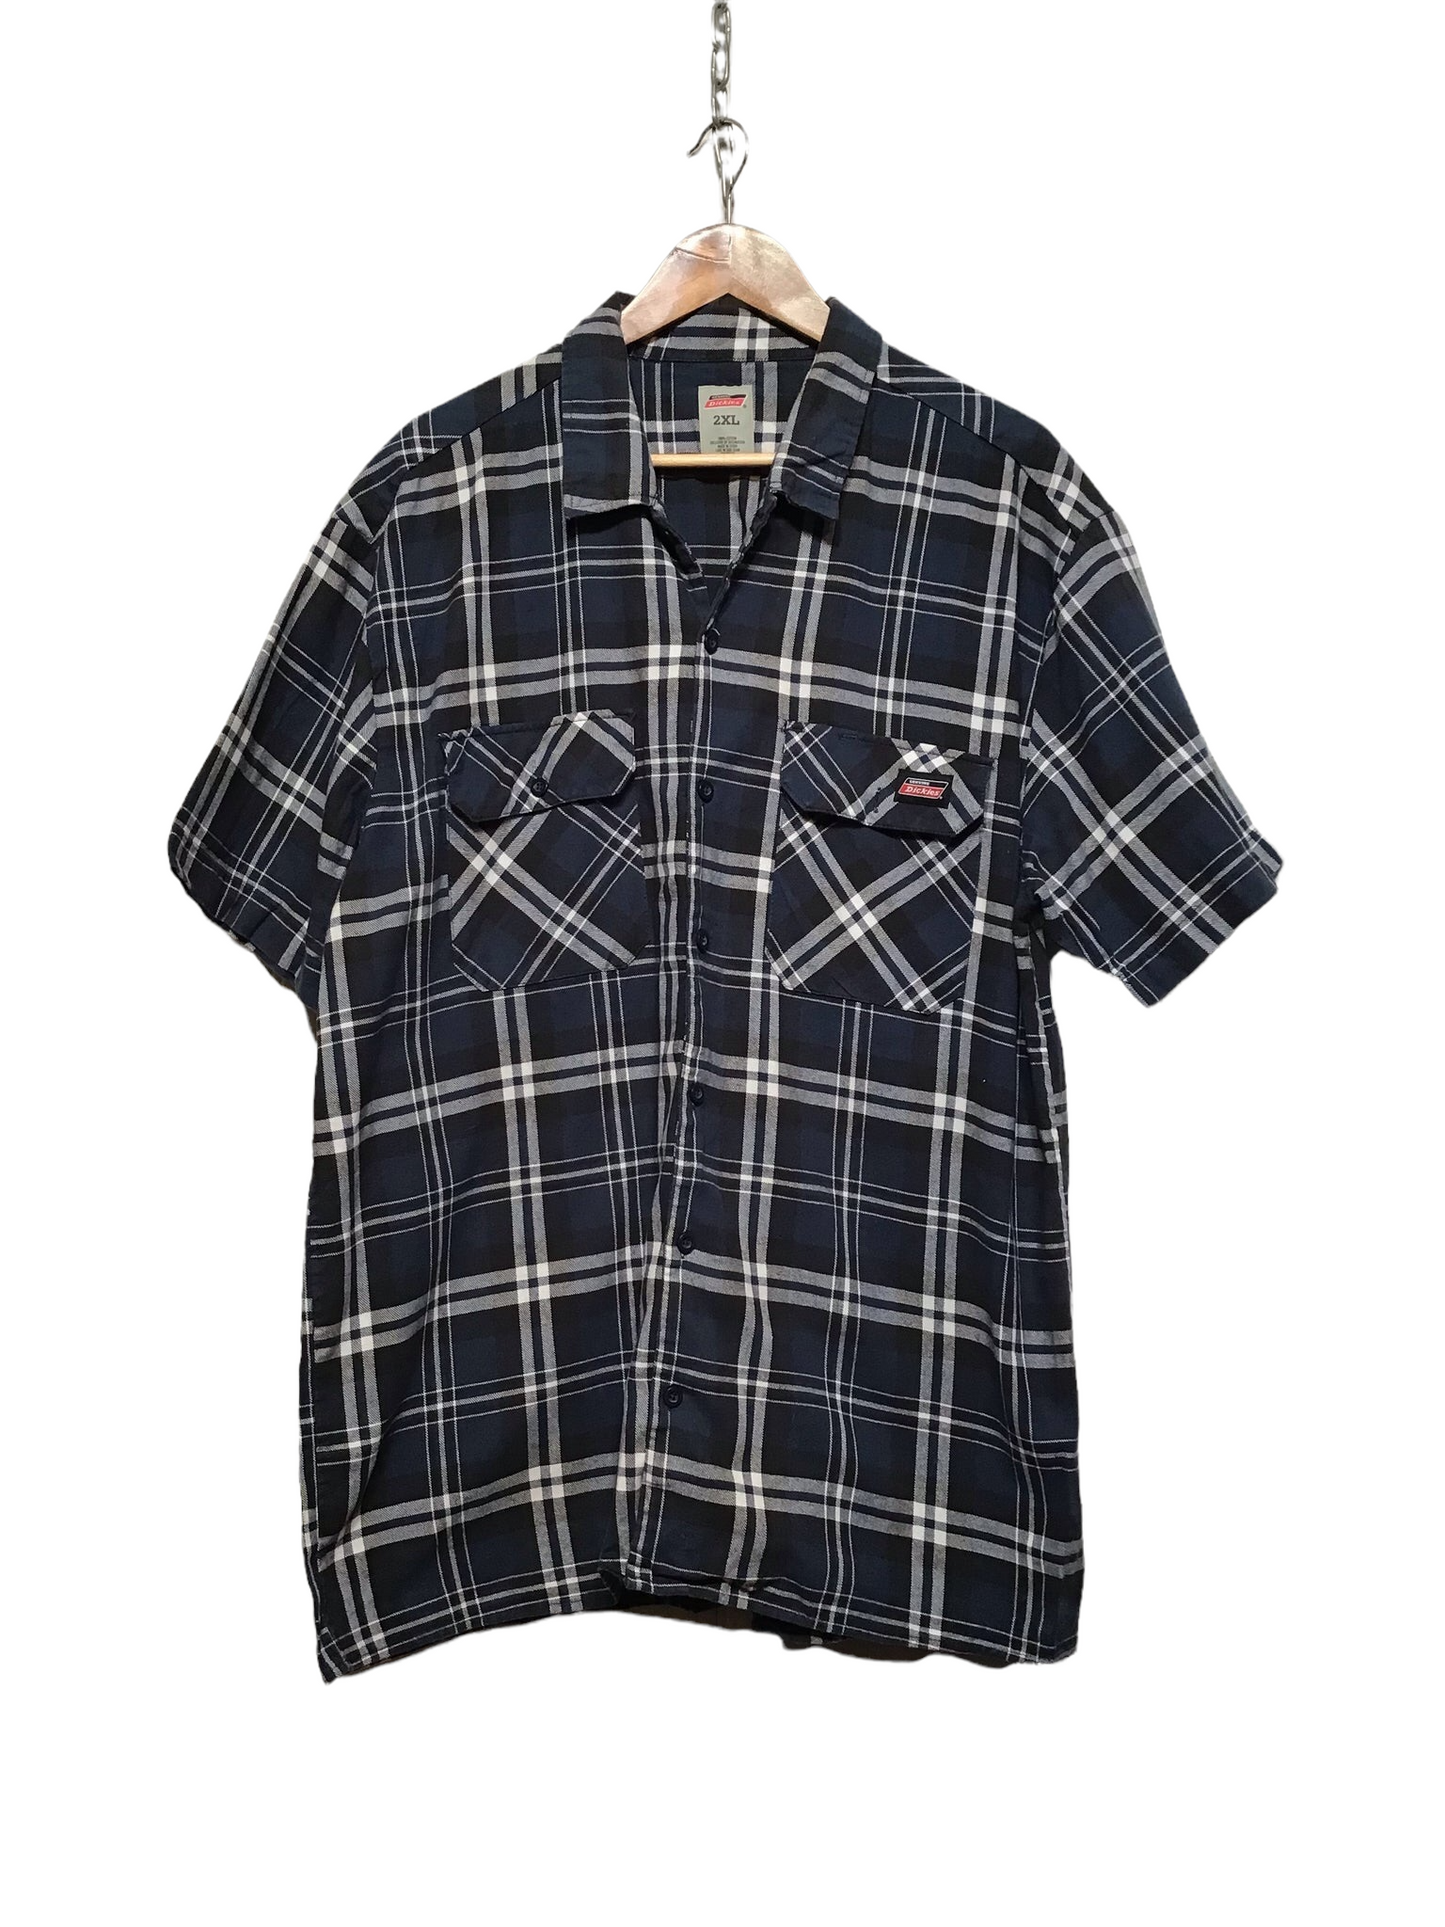 Dickies Chequered Work Shirt (Size XL)